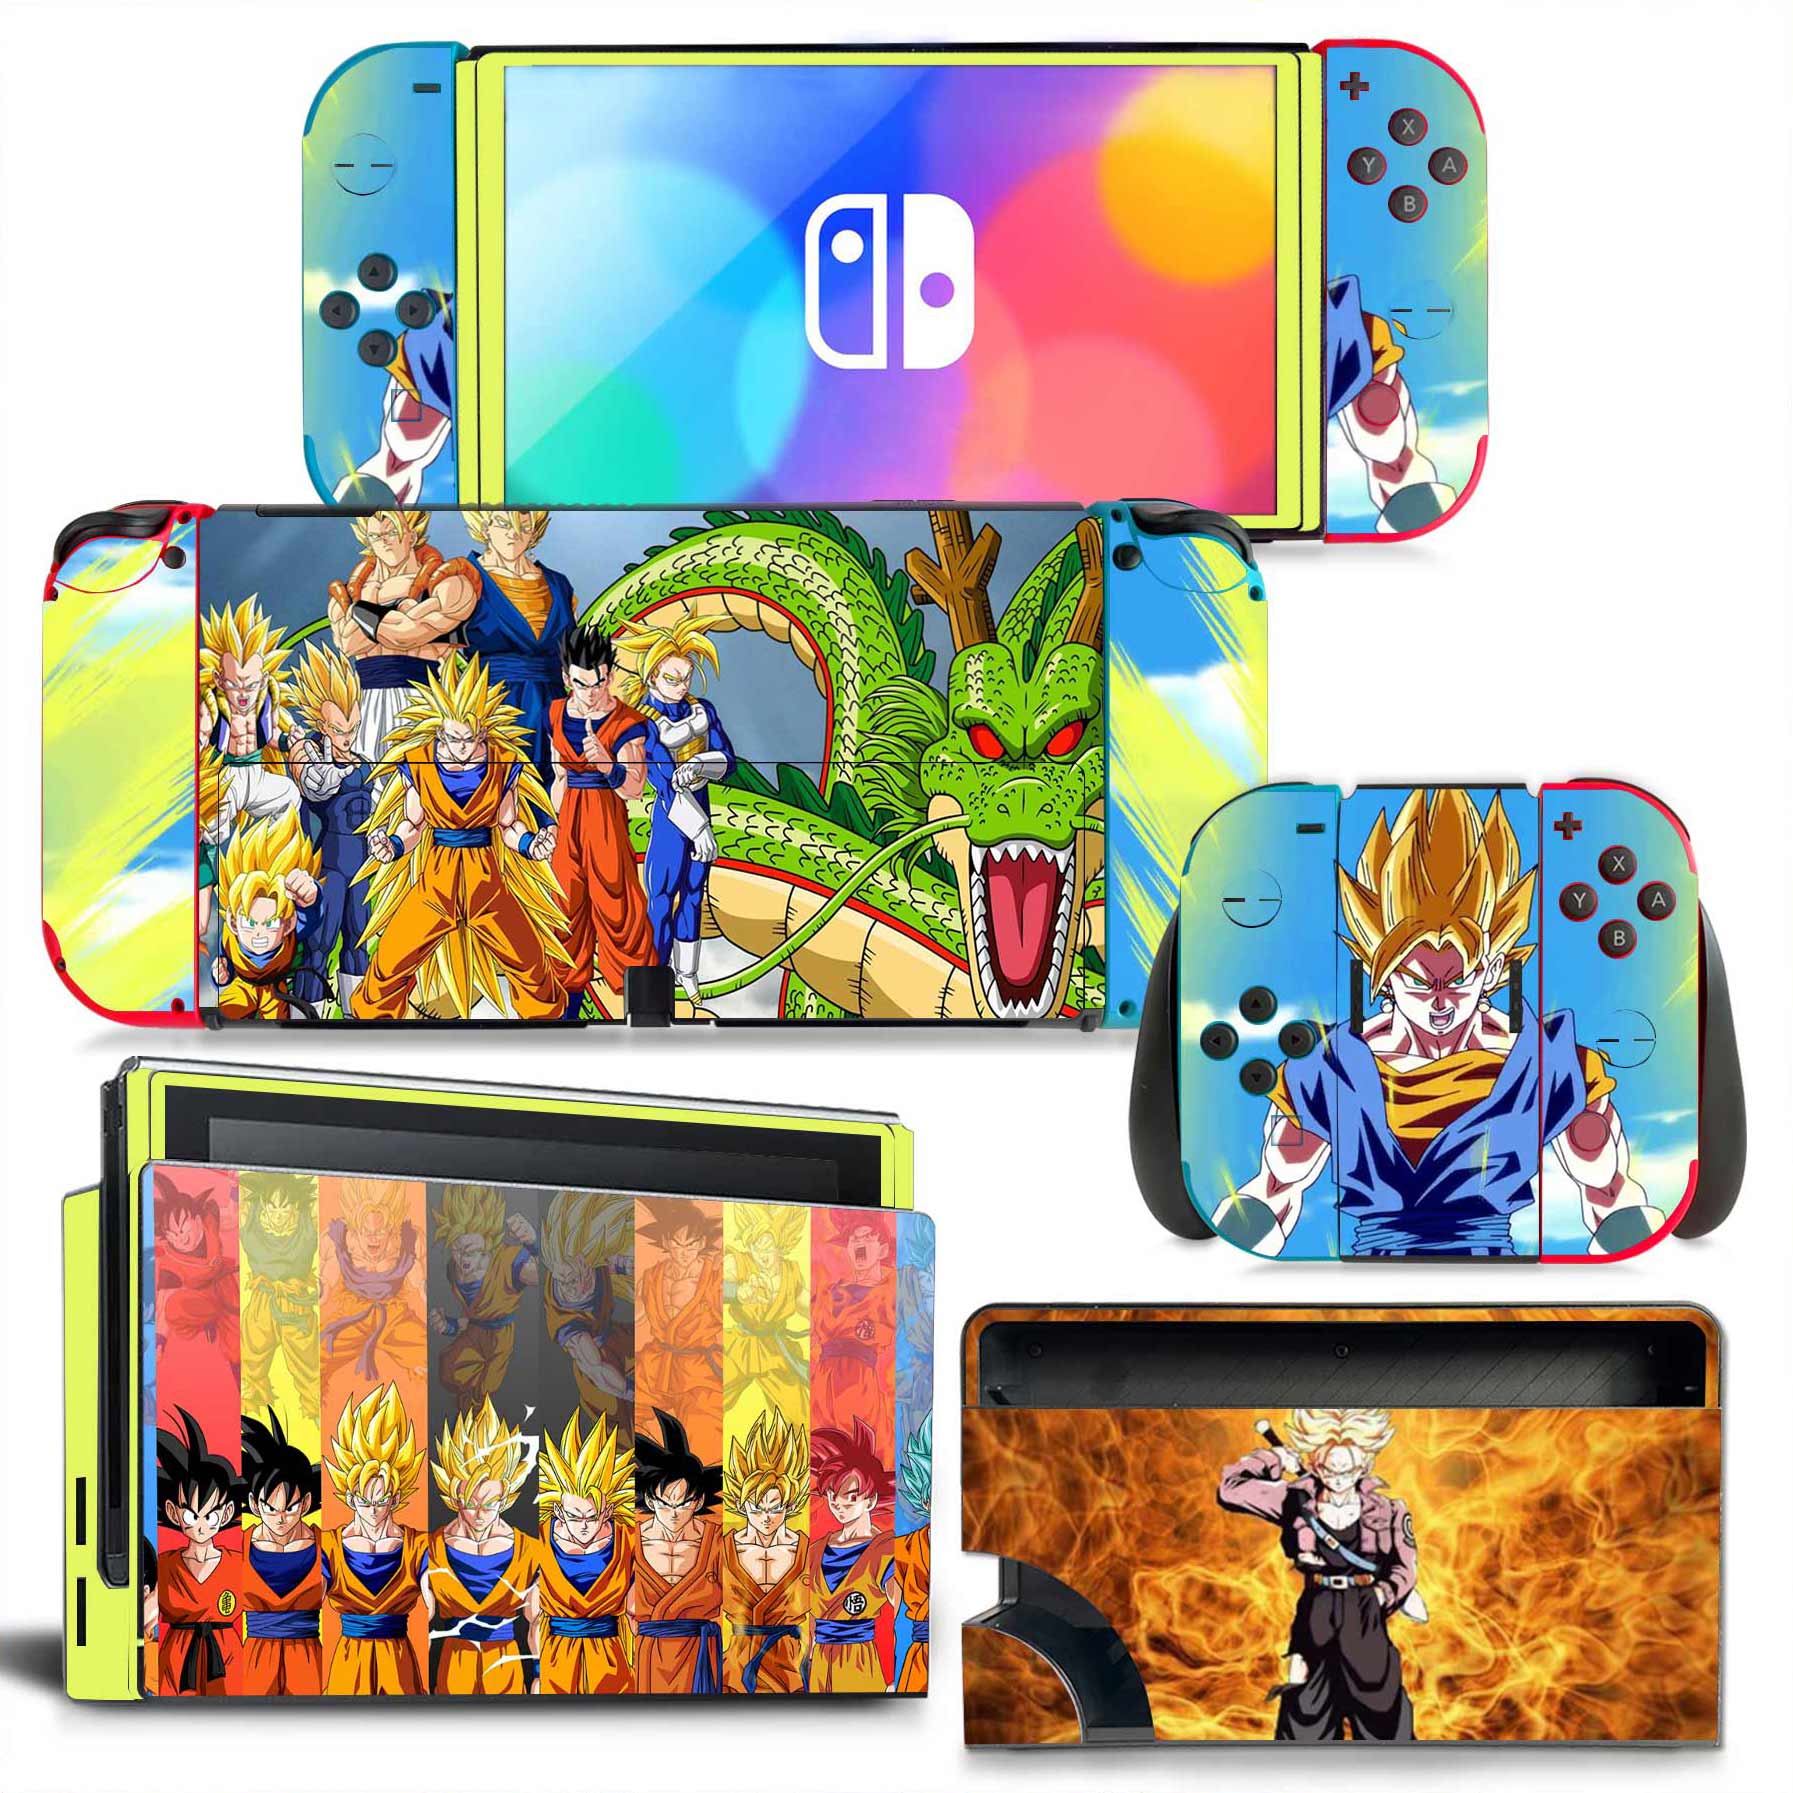 Anime Nintendo Switch Sticker Protective Cover 5